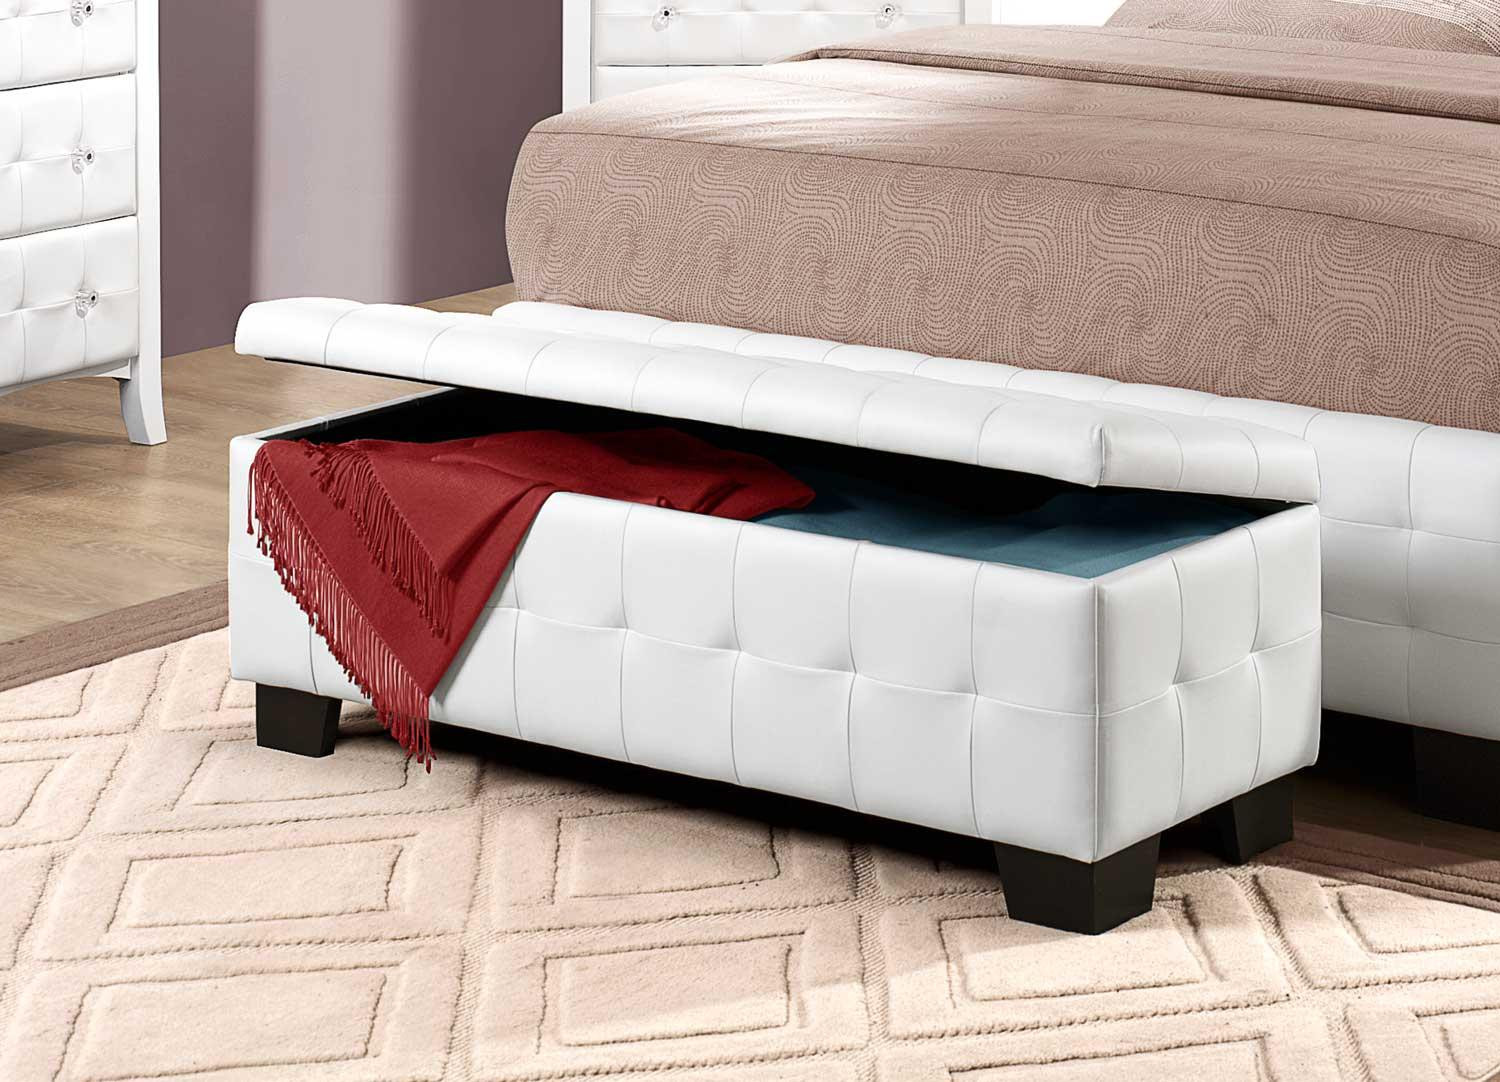 Upholstered Storage Bench With Back
 Upholstered Storage Bench With Back Uk on with HD